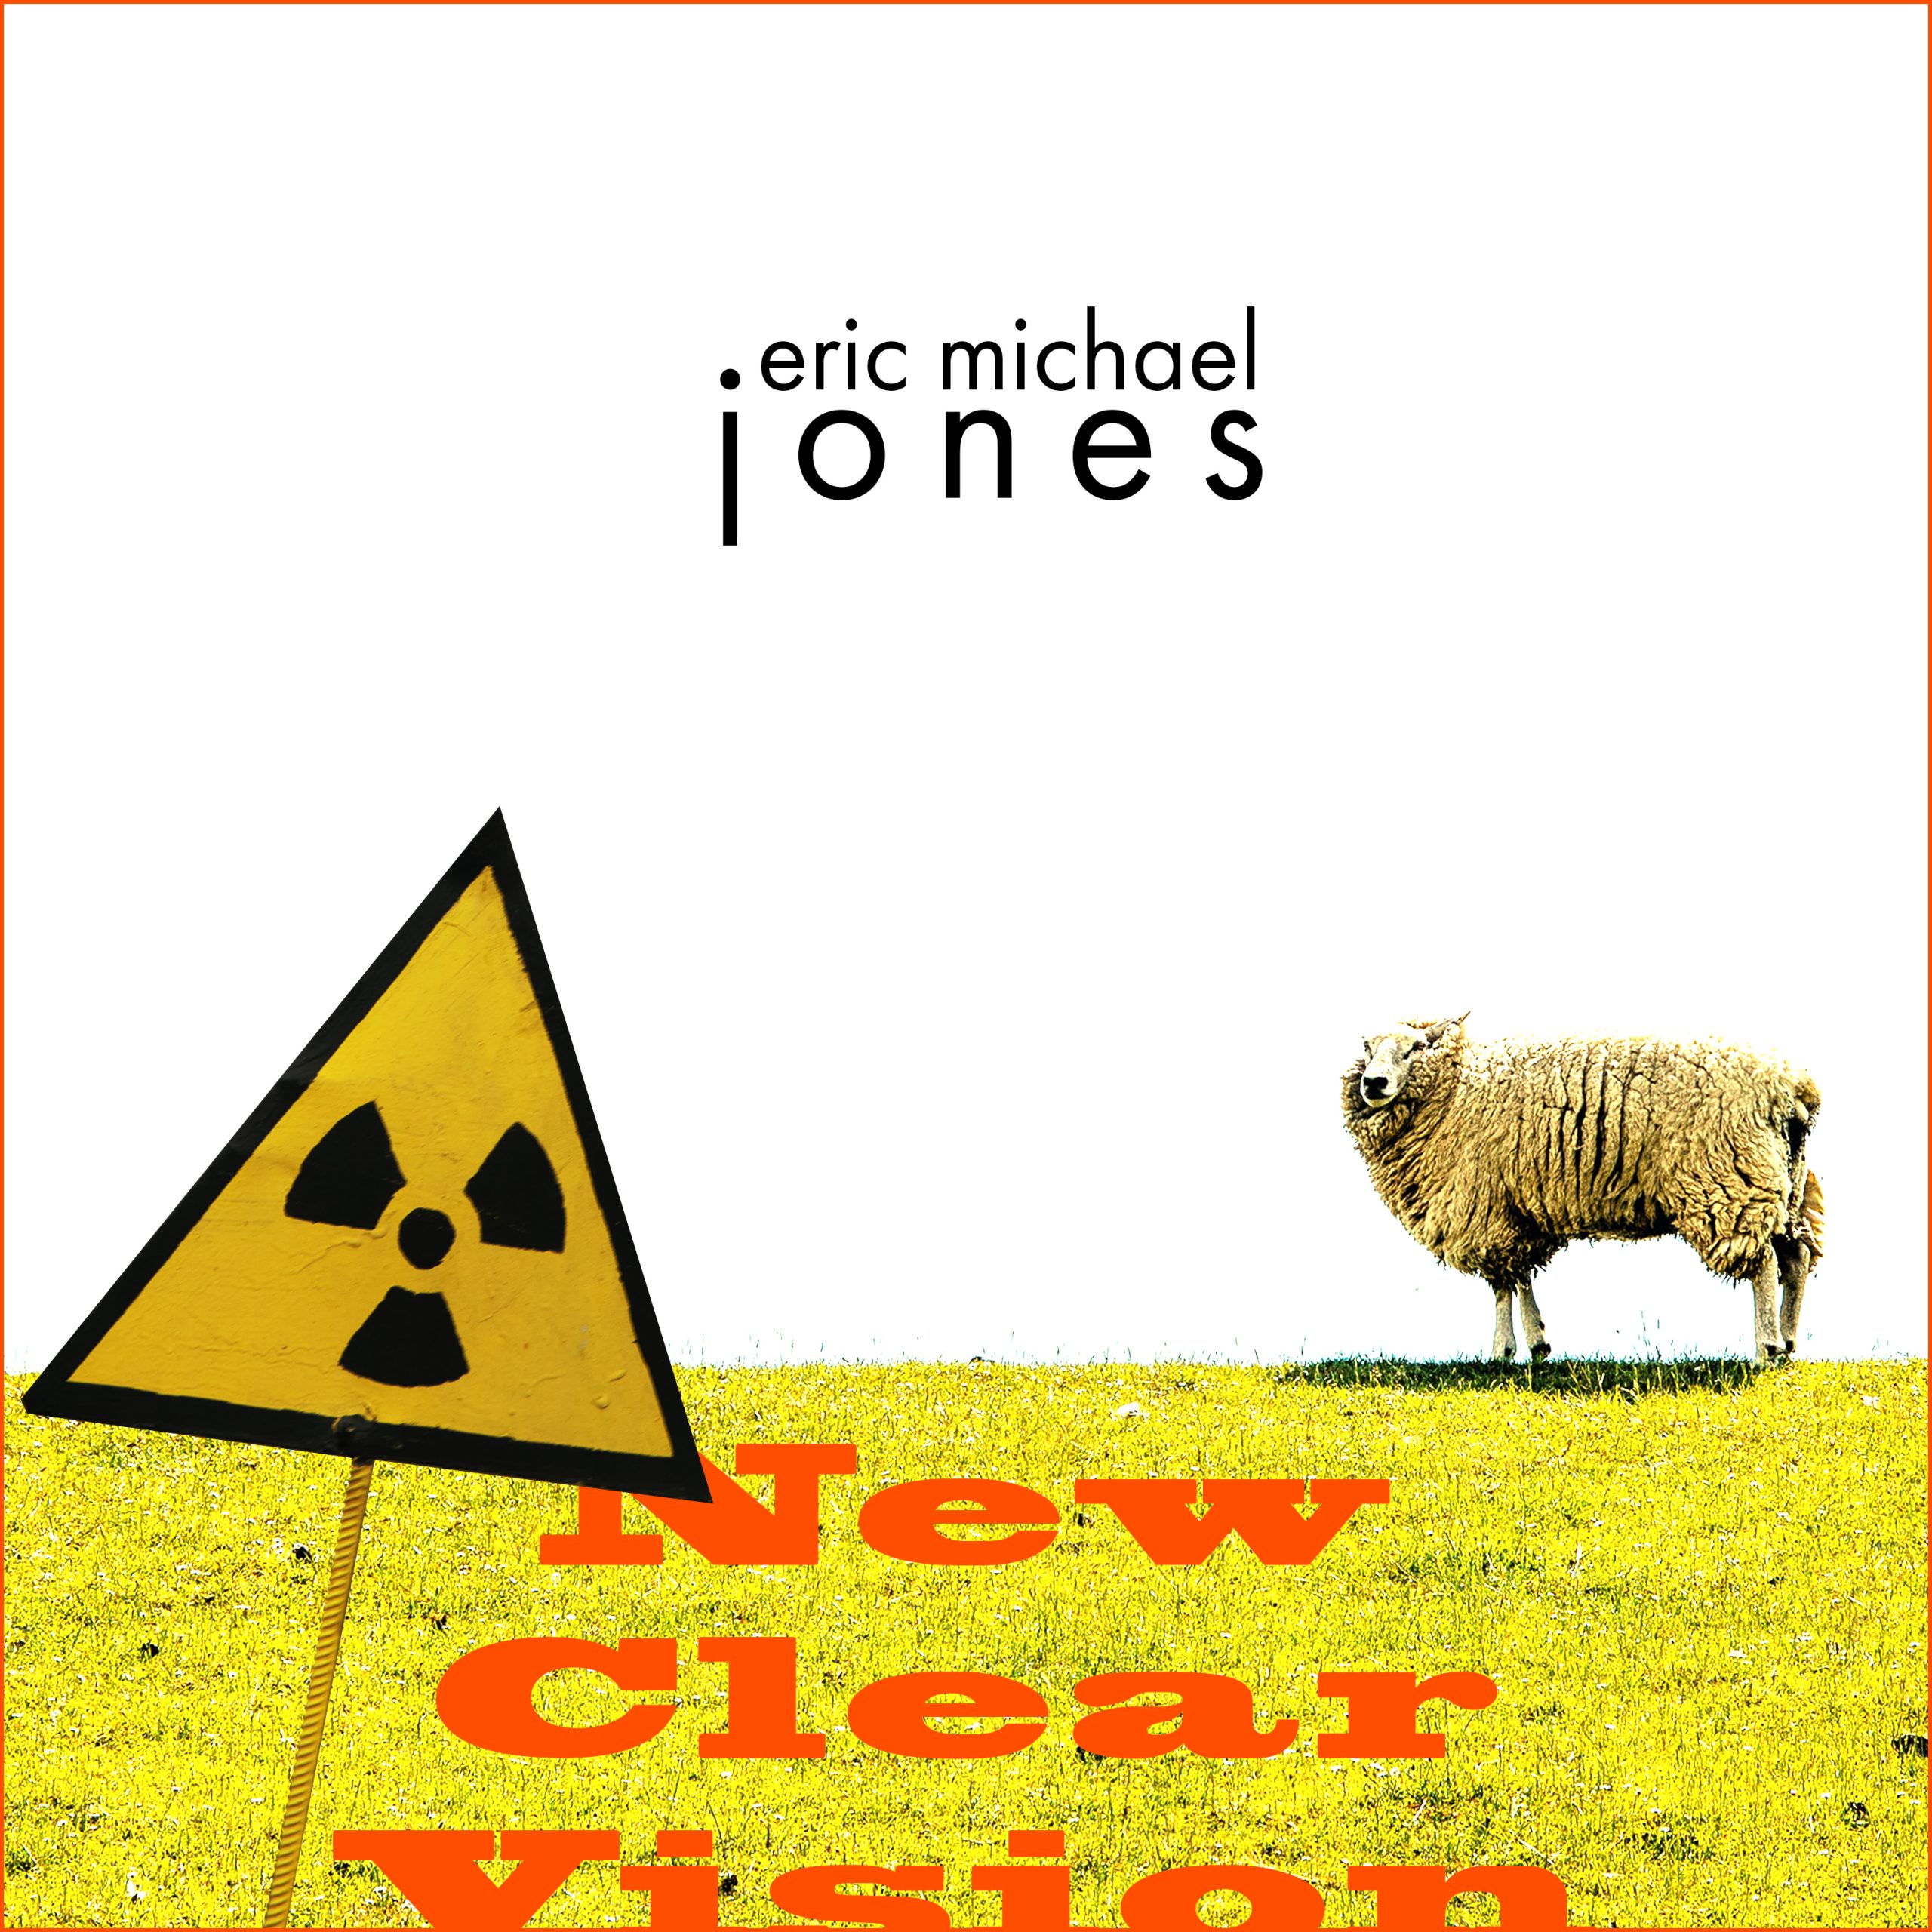 Cover art for New Clear Vision, showing a sheep against a white background with a radiation warning sign in the foreground